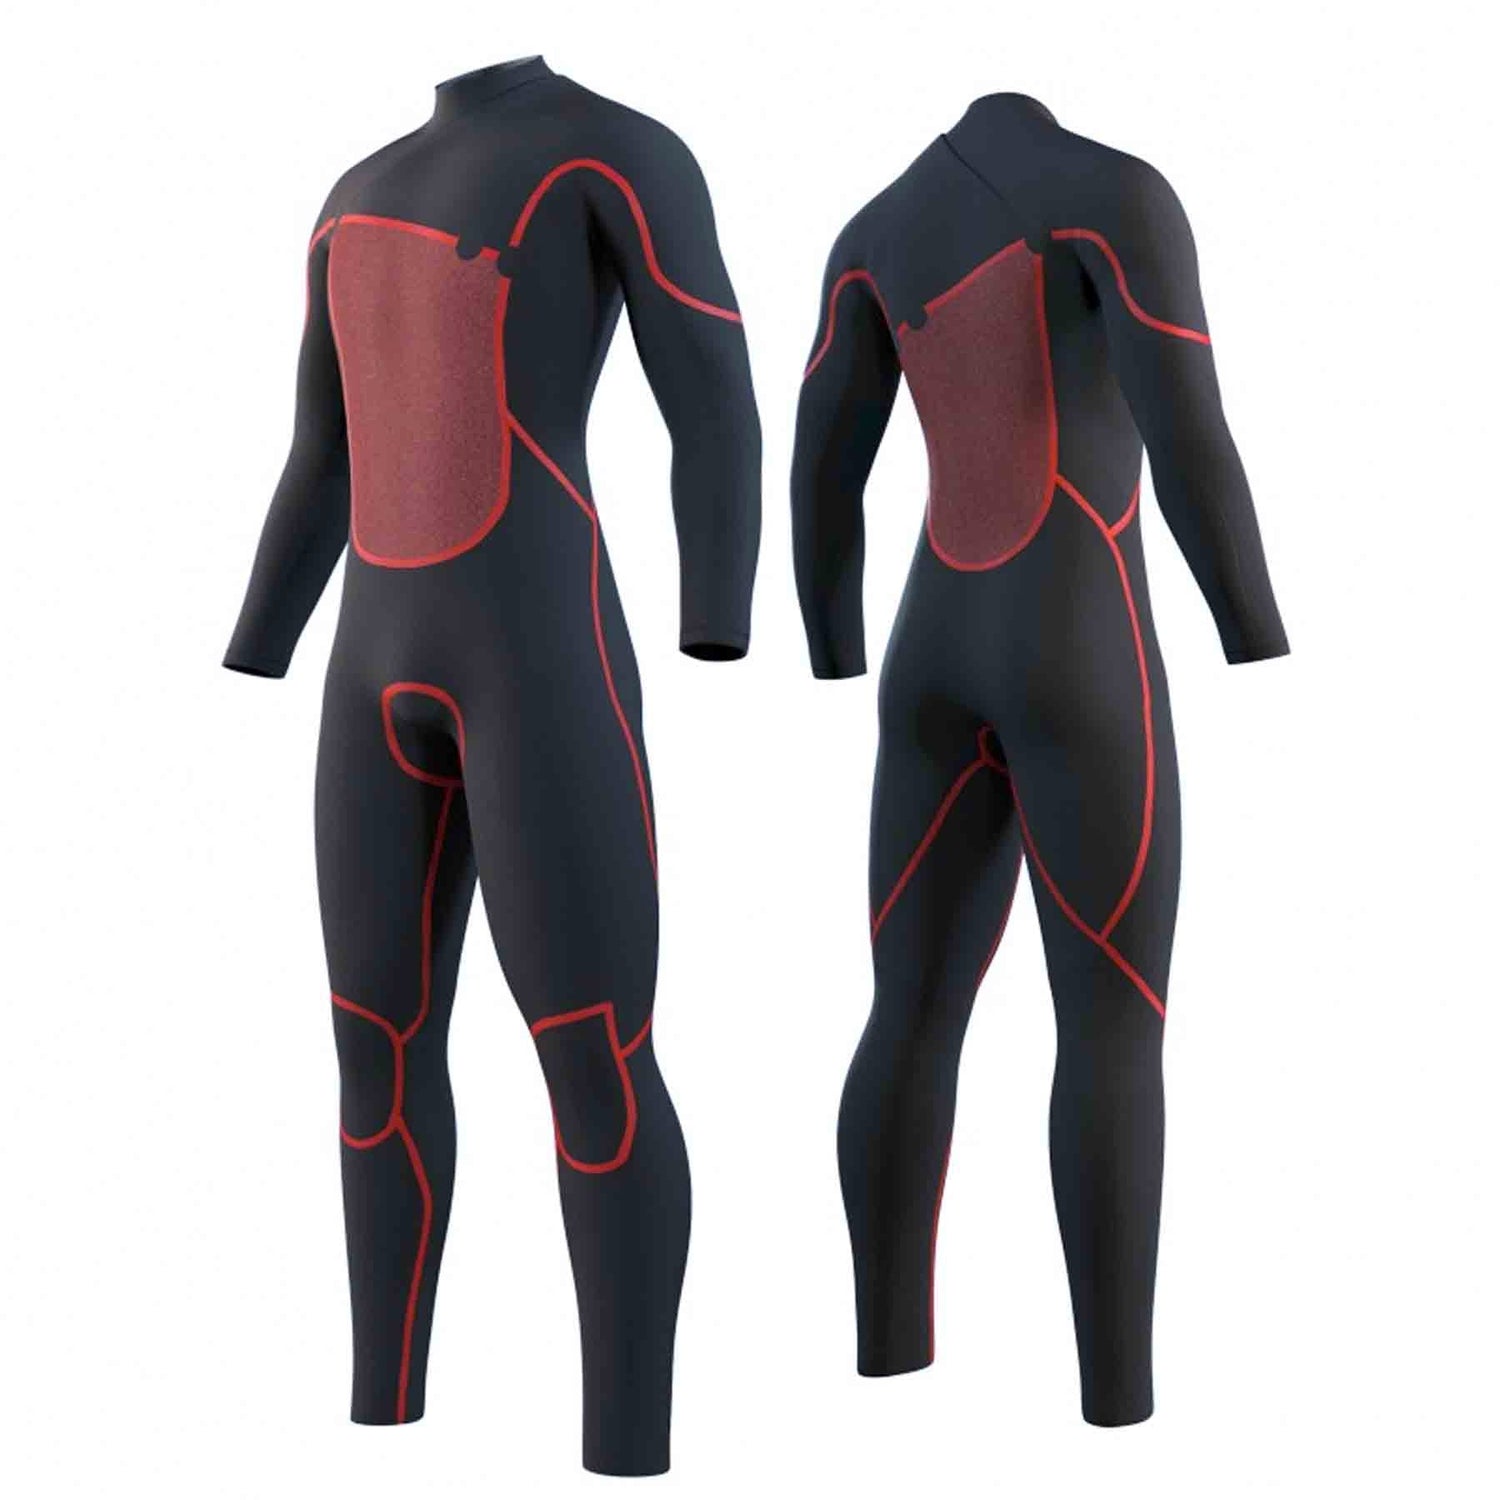 Mystic The One 4/3 Wetsuit Zipless Wetsuit - 2022 - Skymonster Watersports